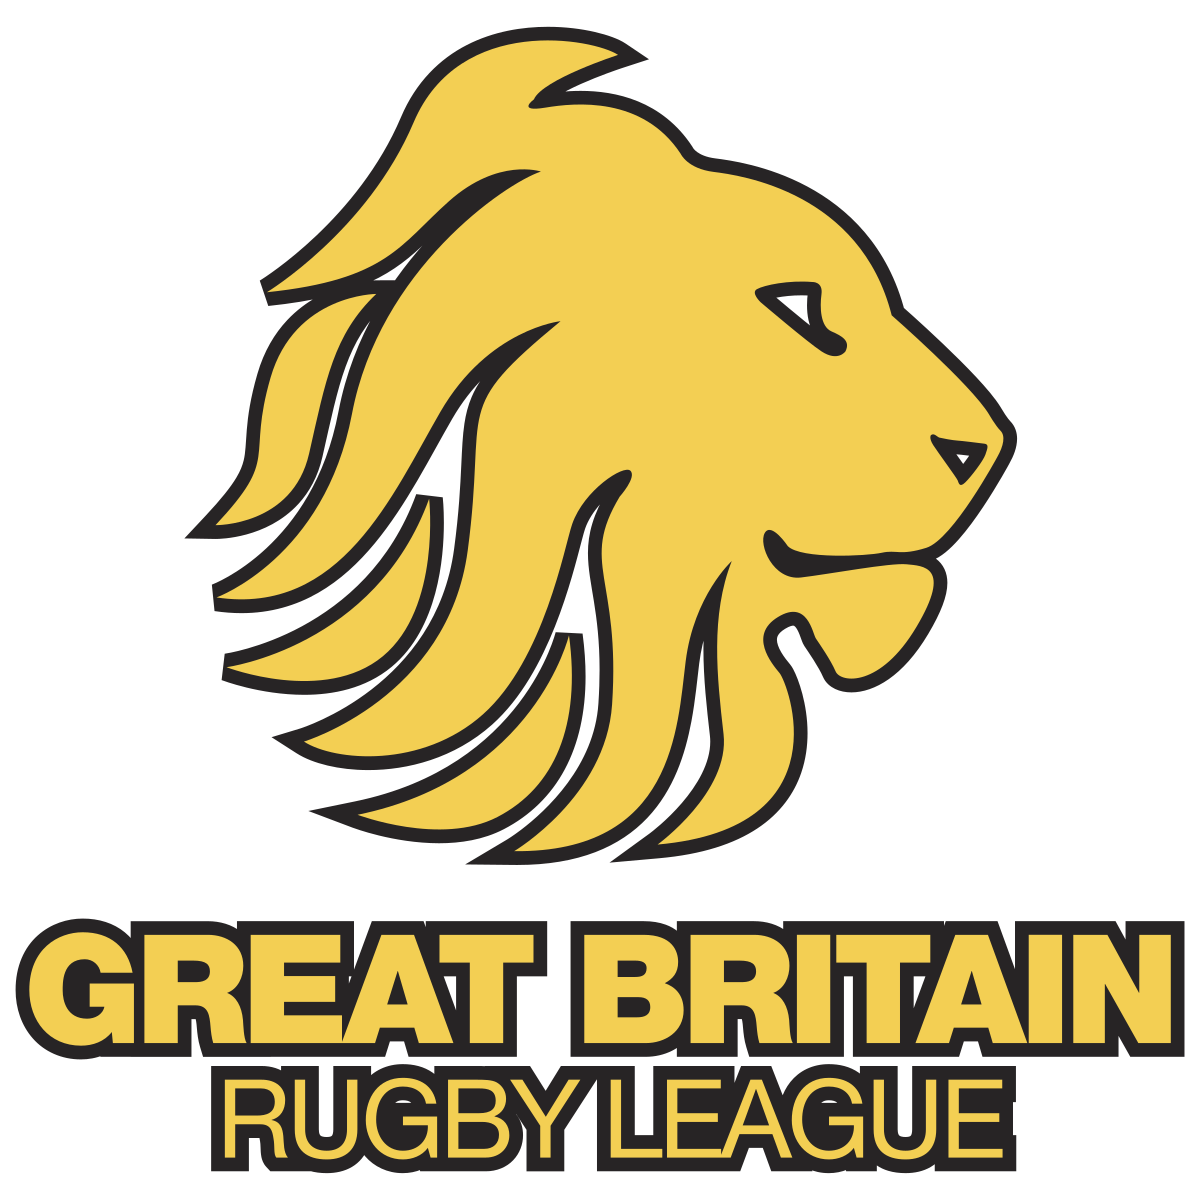 1200px-Great_Britain_Rugby_League_logo.s